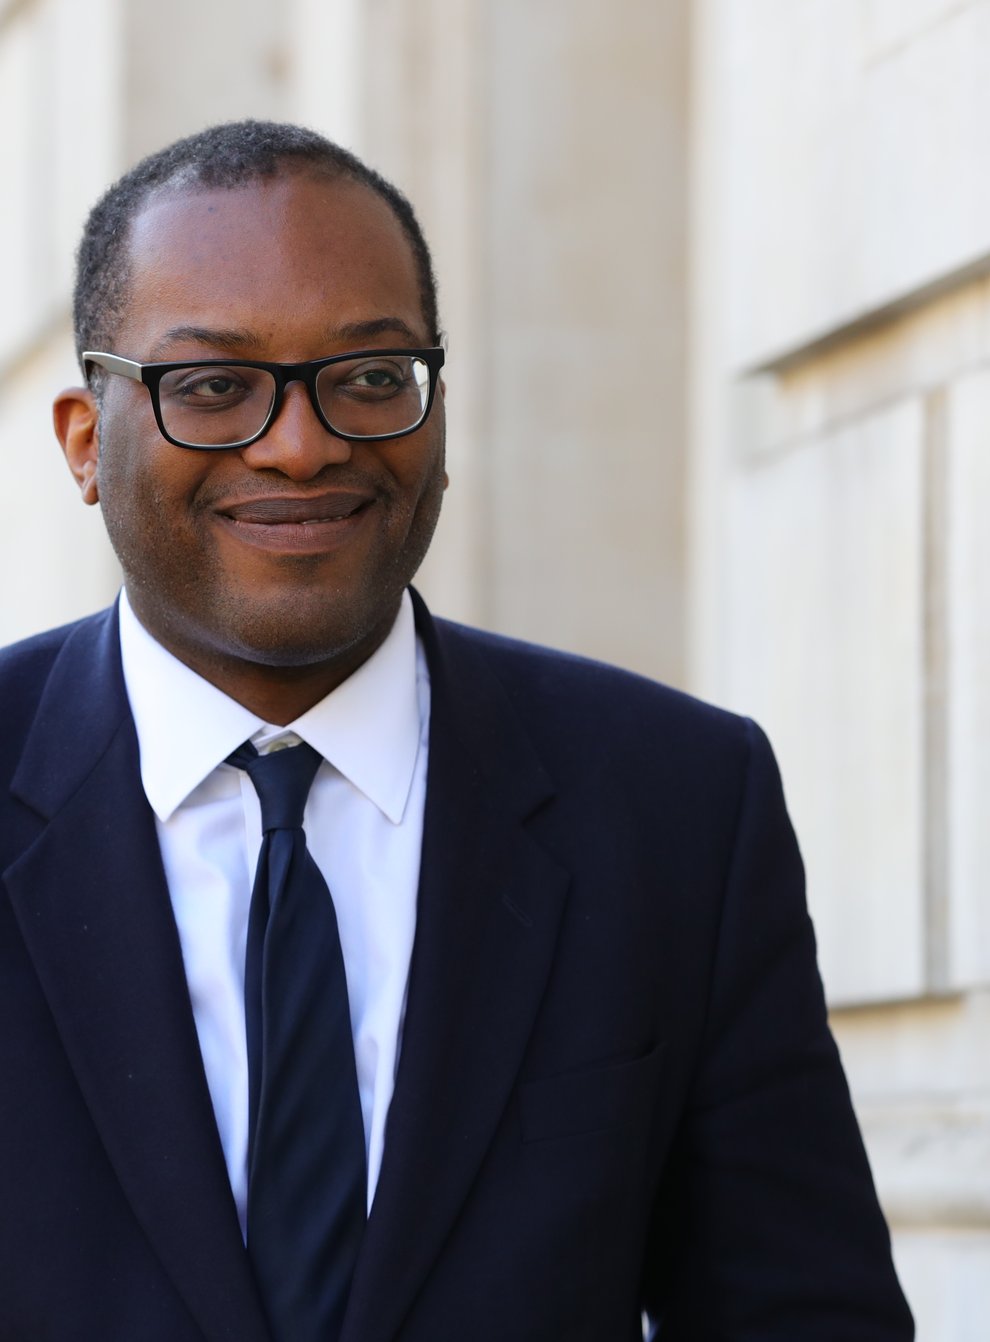 Business Secretary Kwasi Kwarteng has ordered a Competition and Markets Authority inquiry into the proposed acquisition of Ultra Electronics by Cobham Group to assess any national security concerns (Aaron Chown/PA)